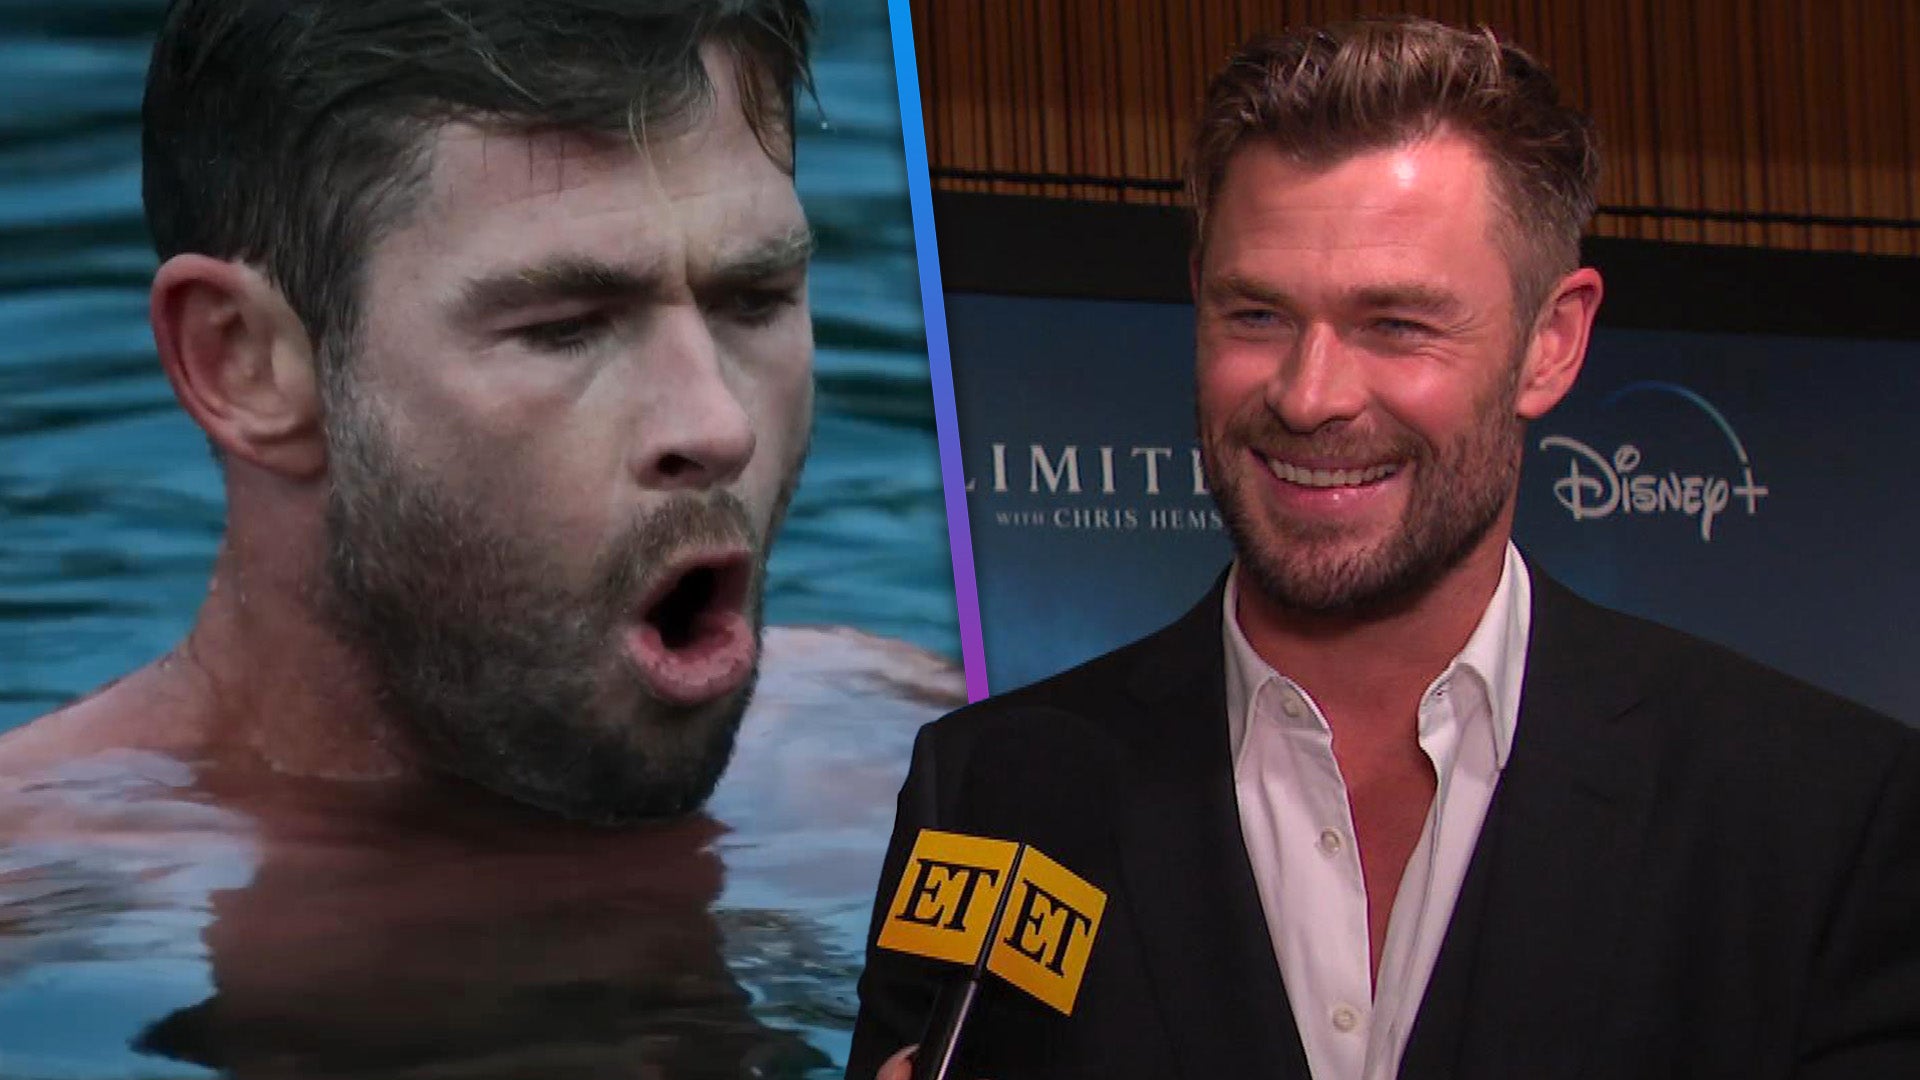 Chris Hemsworth to take a step back from acting after discovering